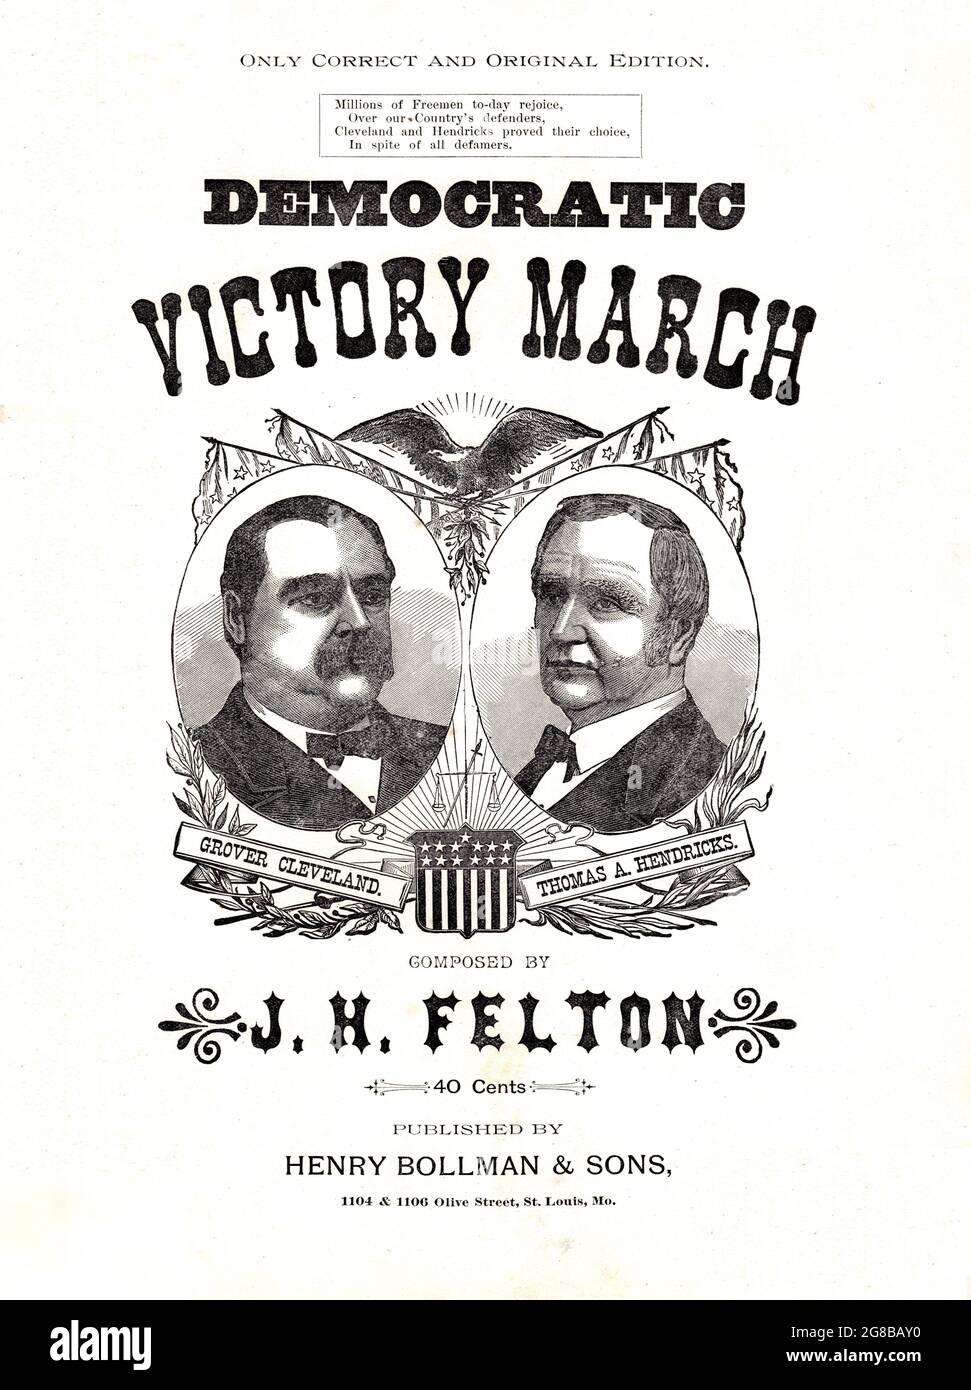 Democratic Victory March,1884 presidential election campaign sheet music for Democrats Grover Cleveland and  Thomas Hendricks with portraits Stock Photo